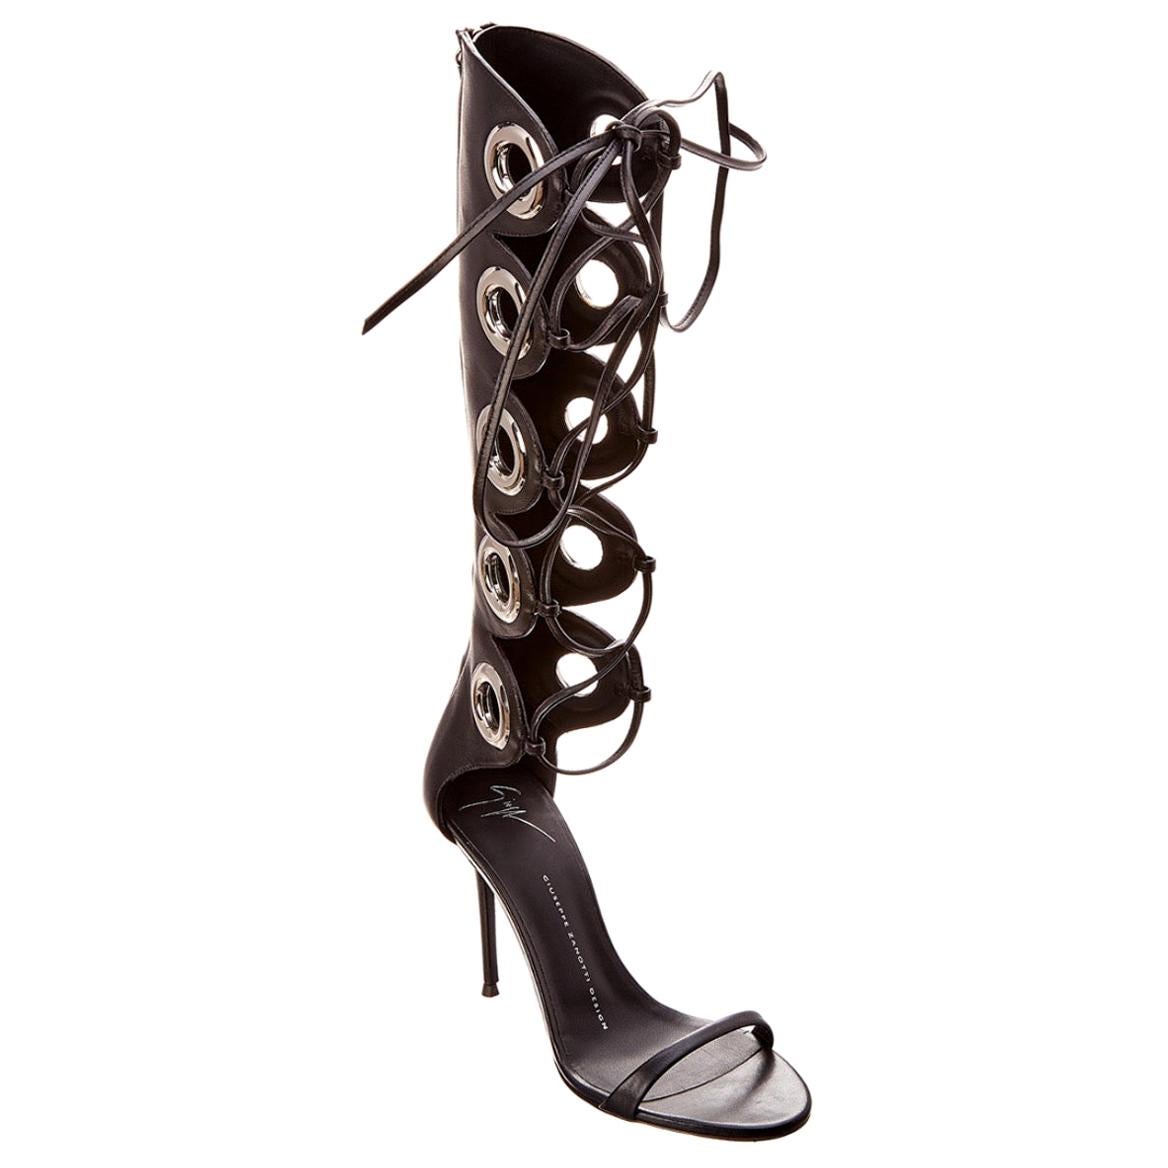 Giuseppe Zanotti NEW Black Leather Silver Grommet Lace Up Sandals Heels in Box 